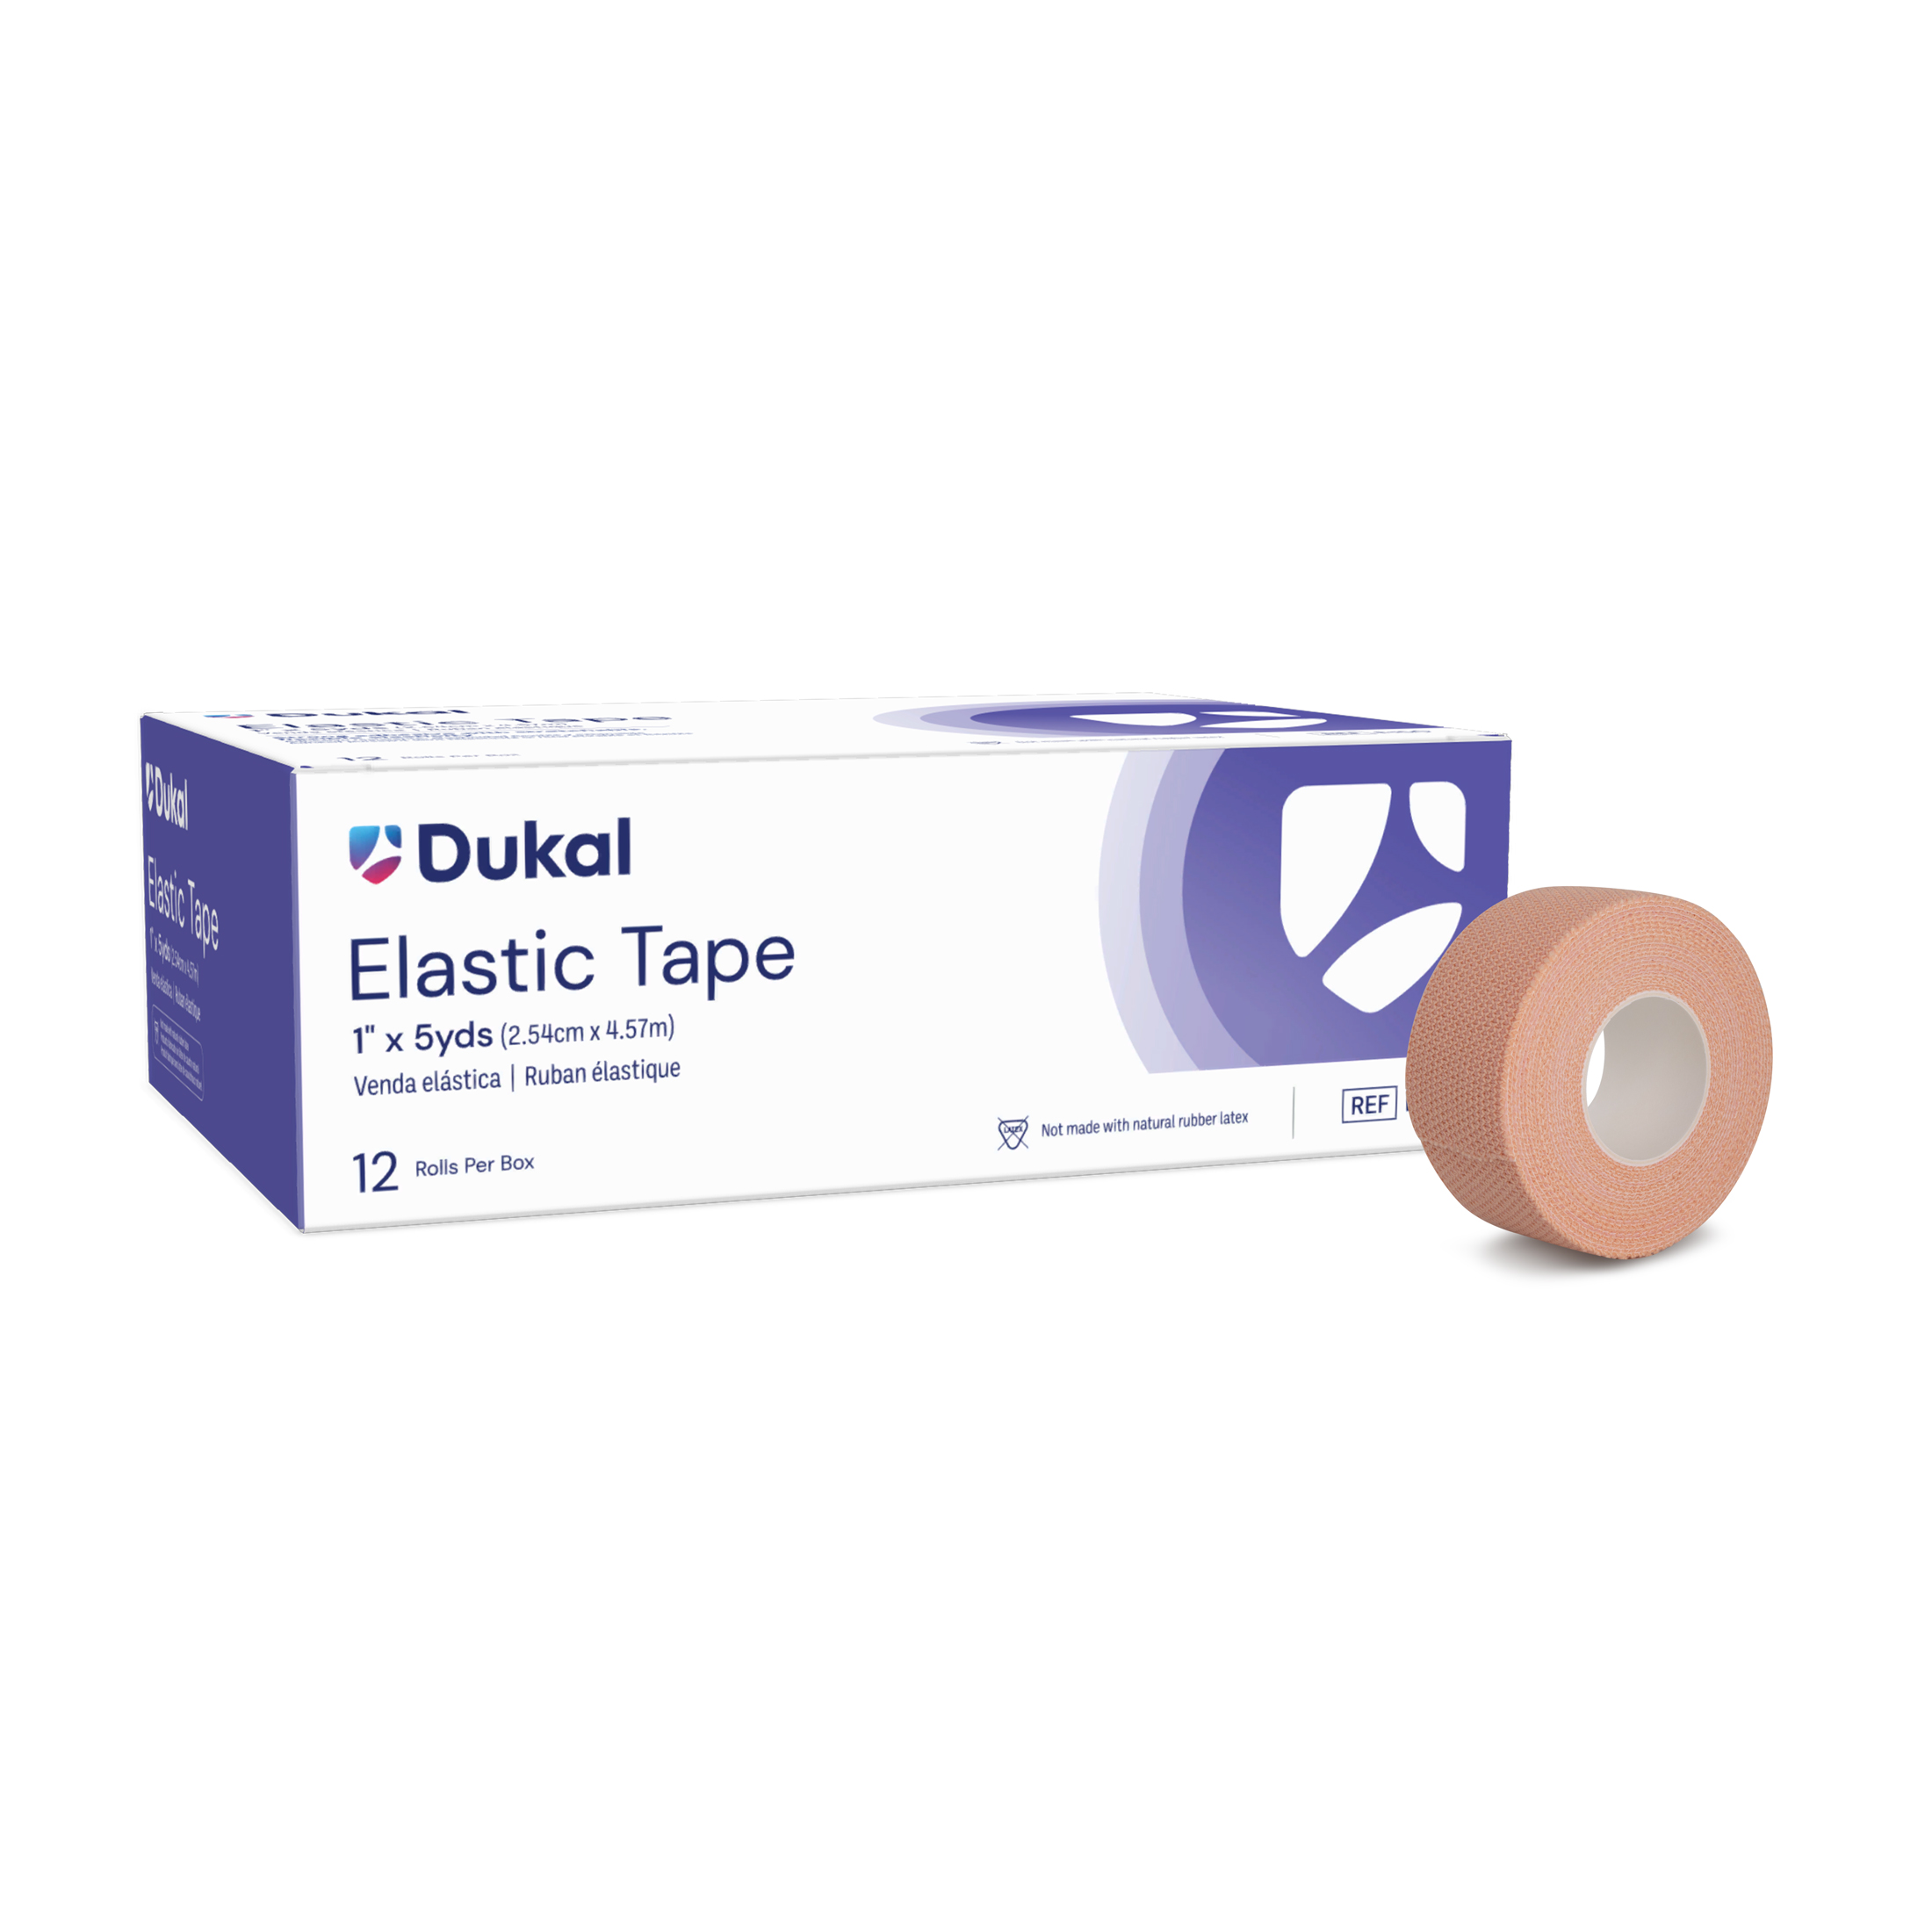 Elastic Tape Products, Supplies and Equipment